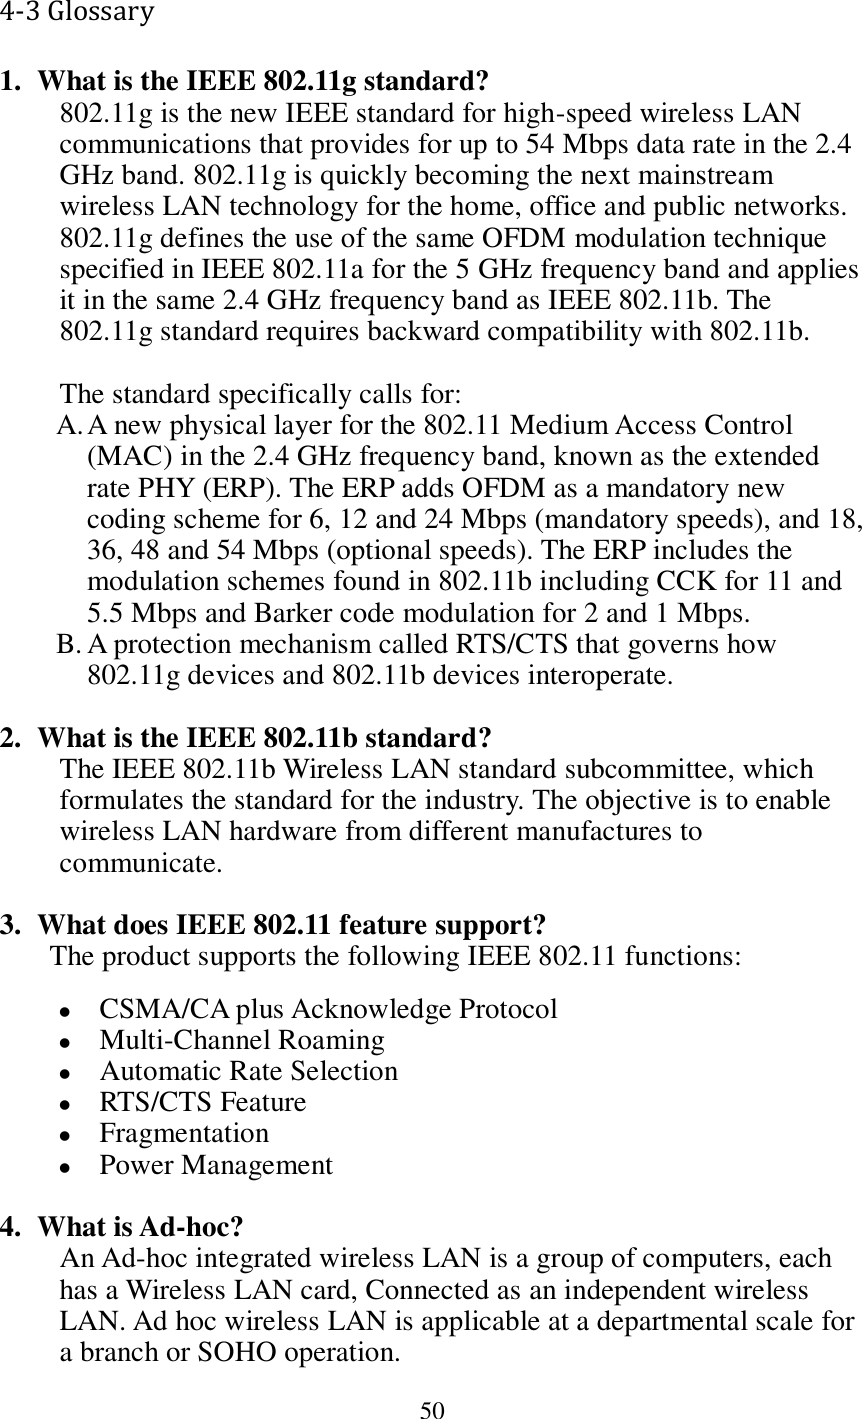 50  4-3 Glossary 1. What is the IEEE 802.11g standard? 802.11g is the new IEEE standard for high-speed wireless LAN communications that provides for up to 54 Mbps data rate in the 2.4 GHz band. 802.11g is quickly becoming the next mainstream wireless LAN technology for the home, office and public networks.   802.11g defines the use of the same OFDM modulation technique specified in IEEE 802.11a for the 5 GHz frequency band and applies it in the same 2.4 GHz frequency band as IEEE 802.11b. The 802.11g standard requires backward compatibility with 802.11b.  The standard specifically calls for:   A. A new physical layer for the 802.11 Medium Access Control (MAC) in the 2.4 GHz frequency band, known as the extended rate PHY (ERP). The ERP adds OFDM as a mandatory new coding scheme for 6, 12 and 24 Mbps (mandatory speeds), and 18, 36, 48 and 54 Mbps (optional speeds). The ERP includes the modulation schemes found in 802.11b including CCK for 11 and 5.5 Mbps and Barker code modulation for 2 and 1 Mbps. B. A protection mechanism called RTS/CTS that governs how 802.11g devices and 802.11b devices interoperate.  2. What is the IEEE 802.11b standard? The IEEE 802.11b Wireless LAN standard subcommittee, which formulates the standard for the industry. The objective is to enable wireless LAN hardware from different manufactures to communicate.  3. What does IEEE 802.11 feature support? The product supports the following IEEE 802.11 functions:  CSMA/CA plus Acknowledge Protocol  Multi-Channel Roaming  Automatic Rate Selection  RTS/CTS Feature  Fragmentation  Power Management  4. What is Ad-hoc? An Ad-hoc integrated wireless LAN is a group of computers, each has a Wireless LAN card, Connected as an independent wireless LAN. Ad hoc wireless LAN is applicable at a departmental scale for a branch or SOHO operation. 